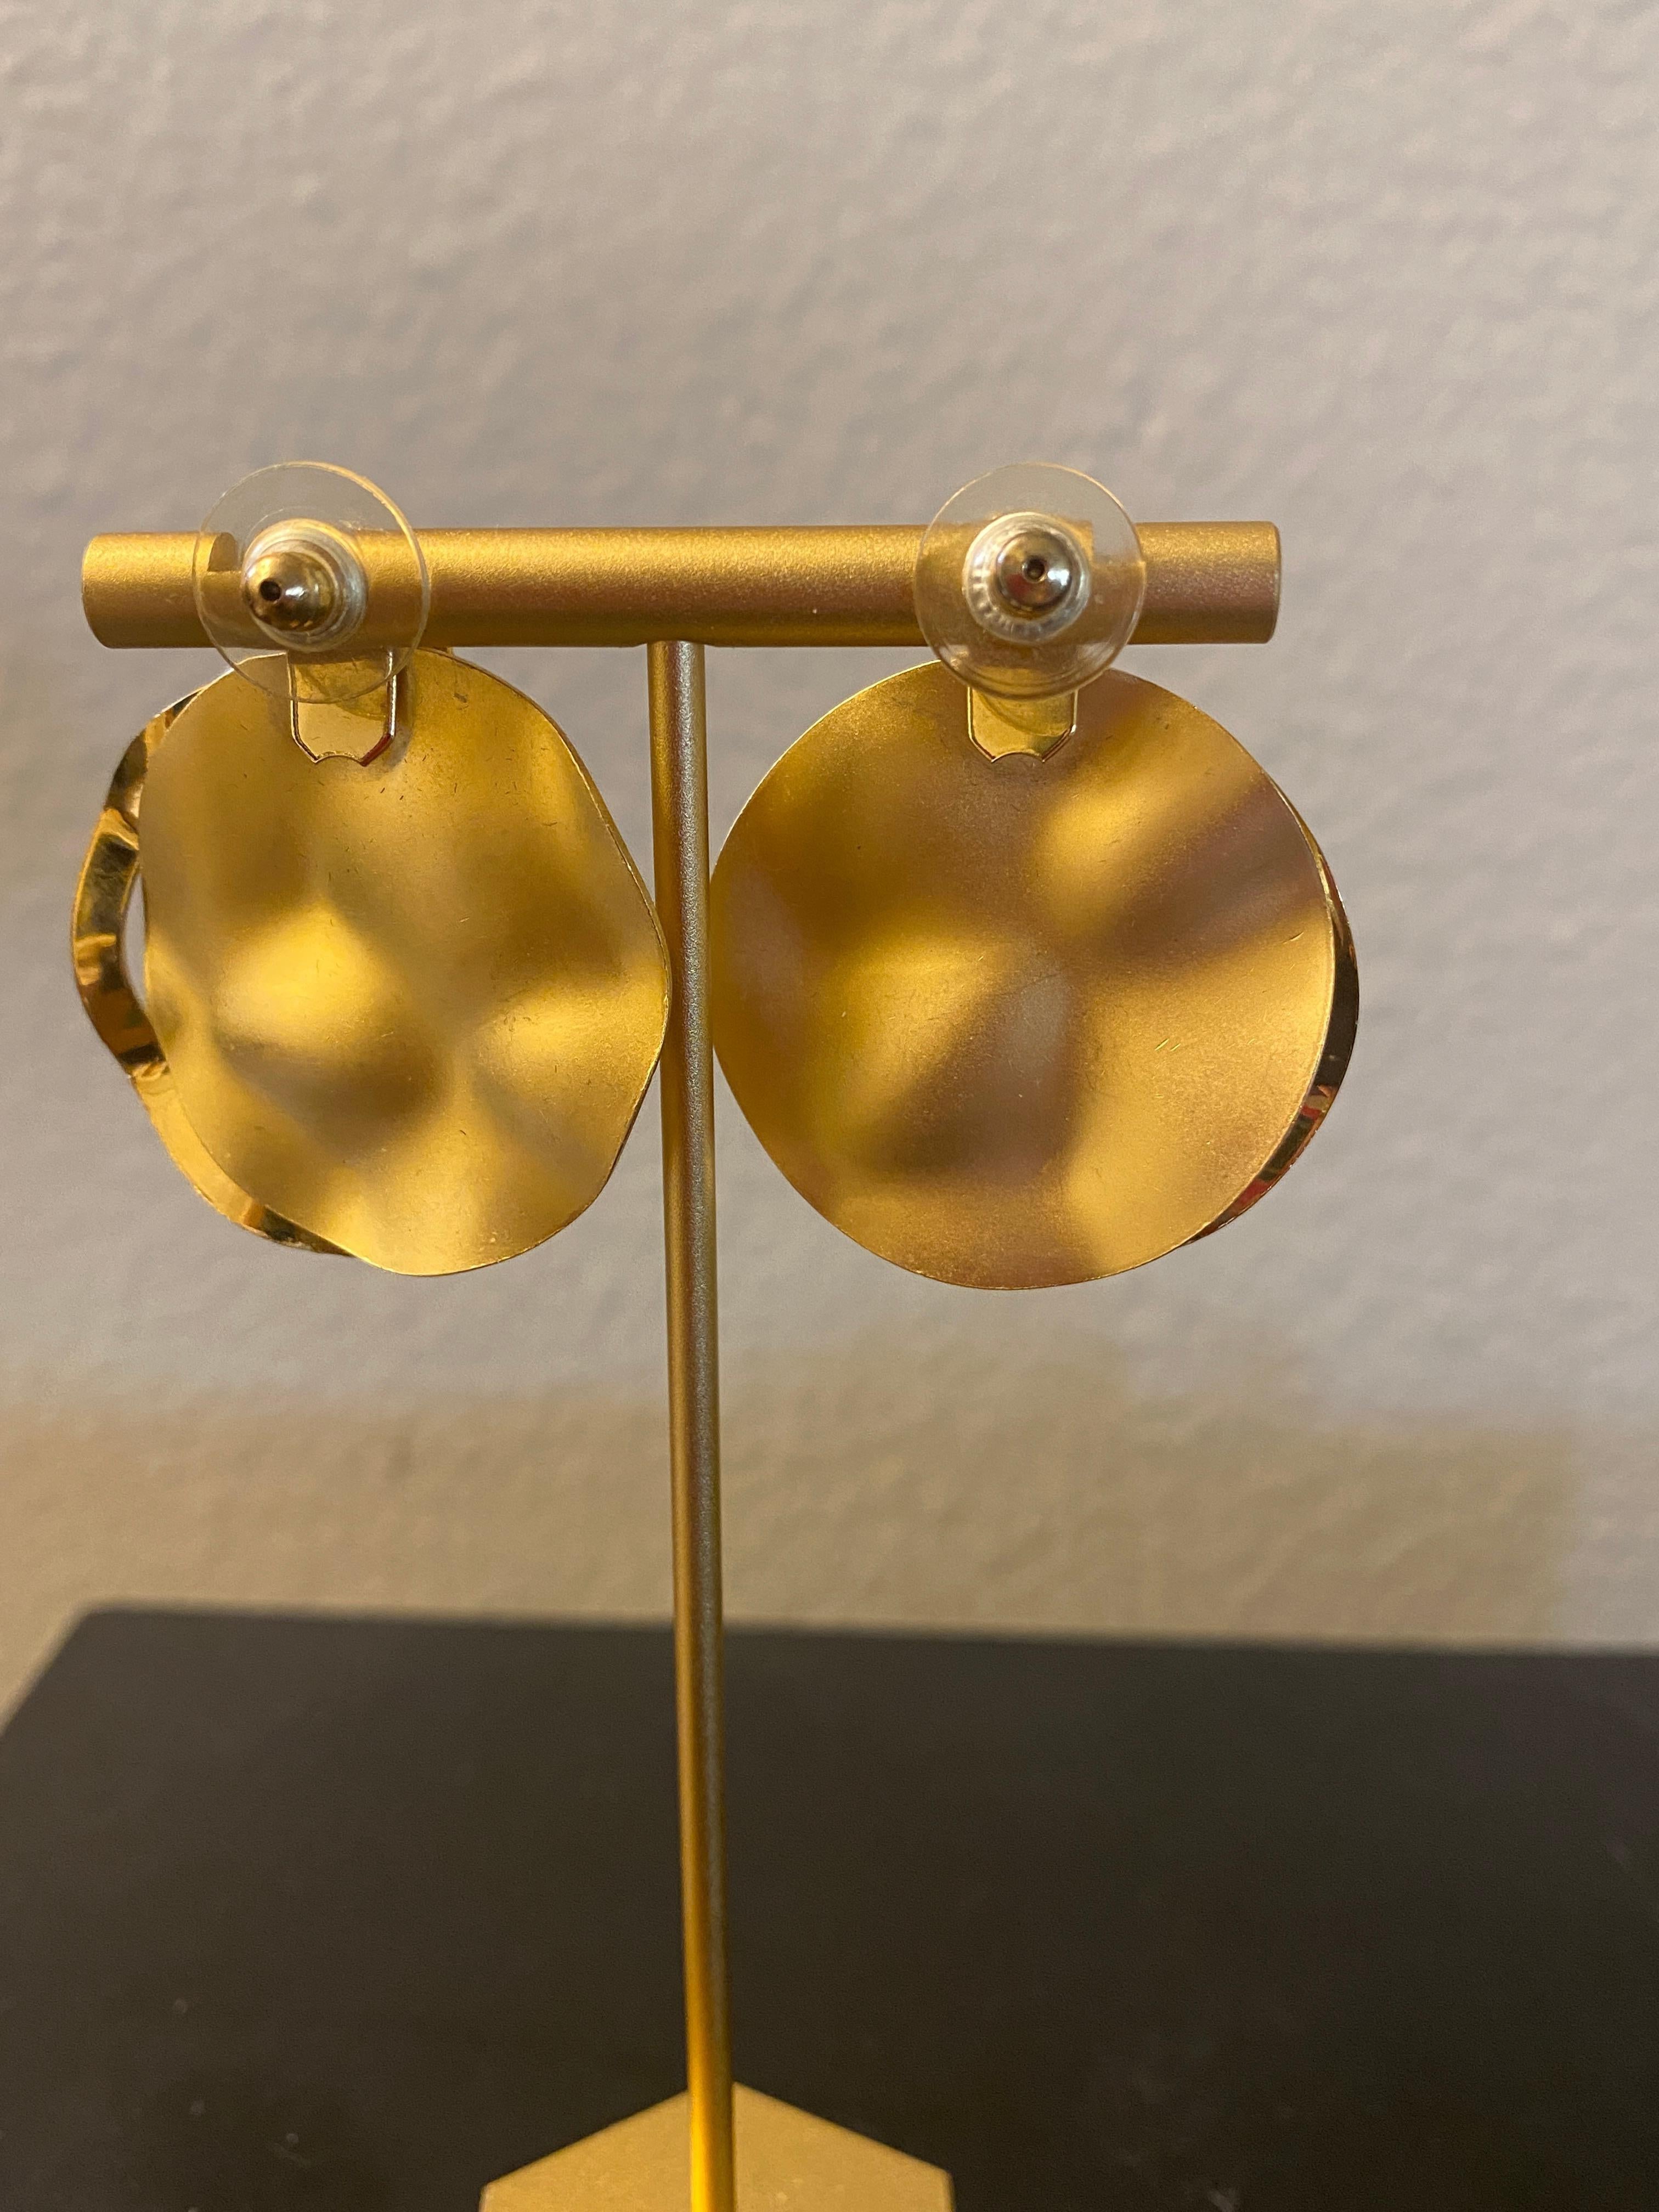 Modernist Palm Springs Fashionista Curated Vintage Earring Collection 1950s-2000 #20/100 For Sale